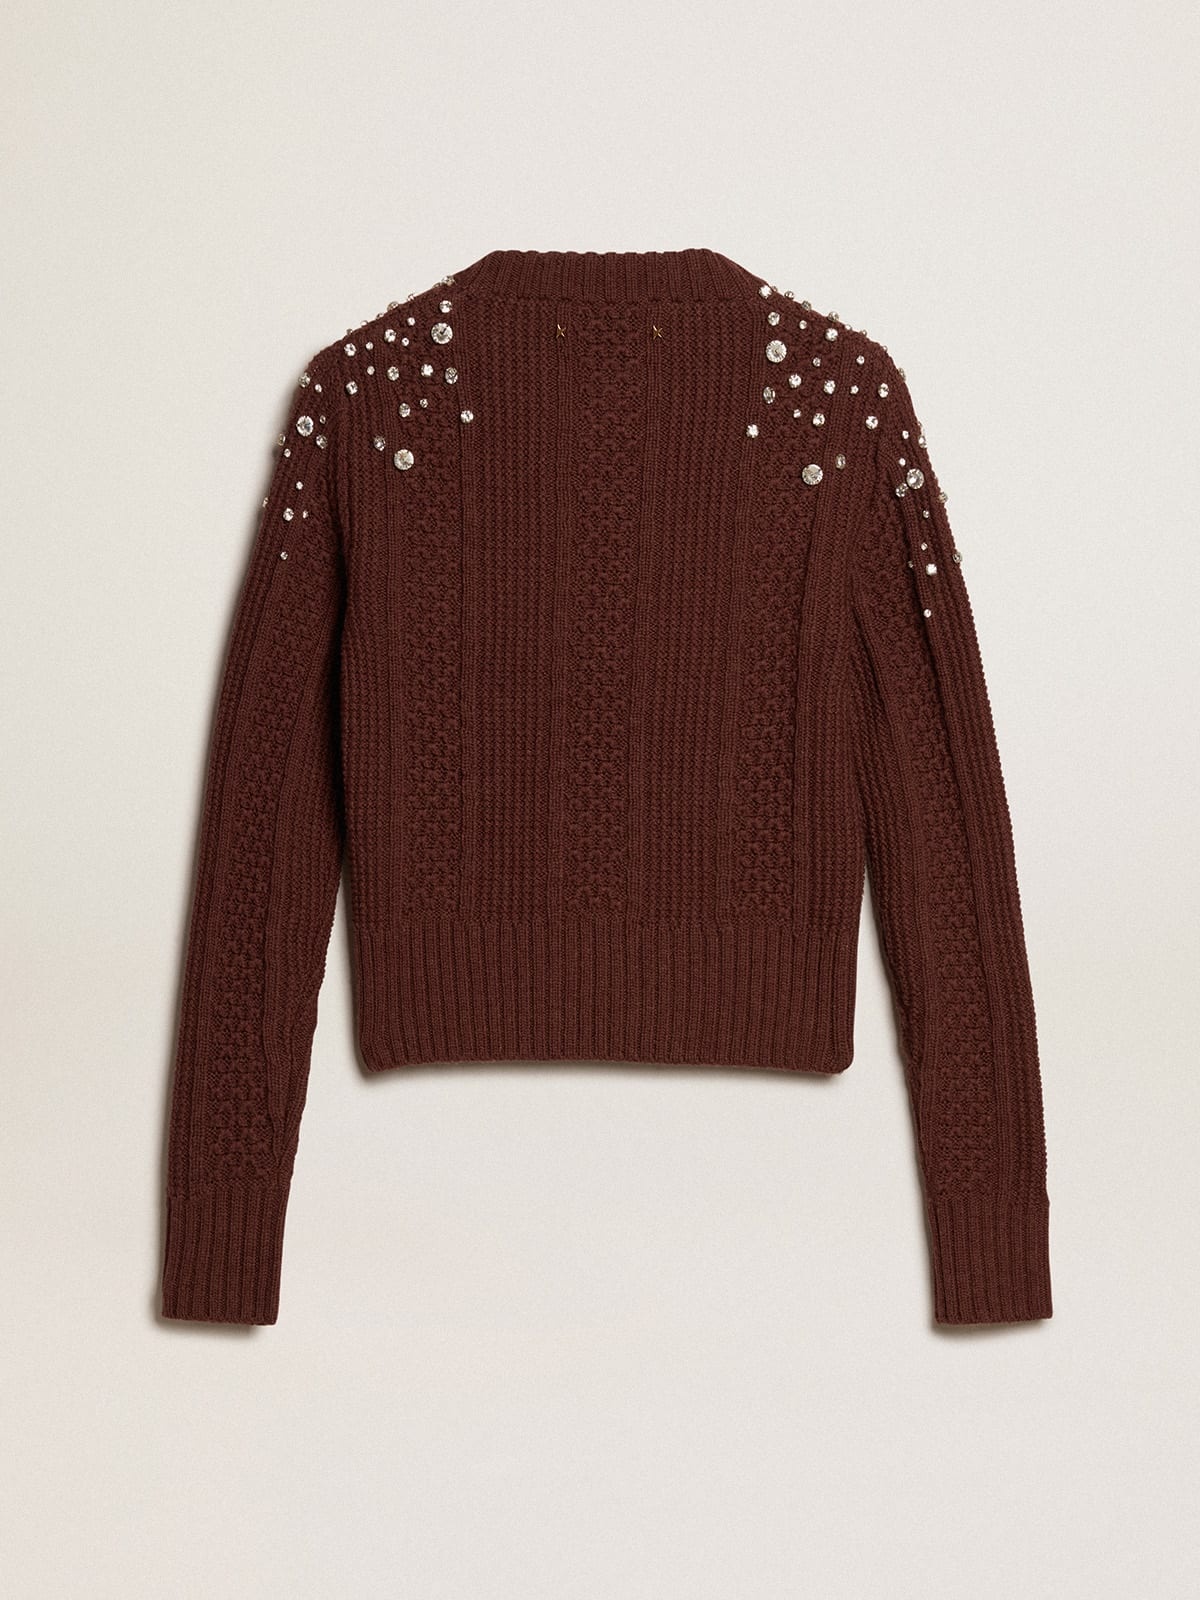 Cropped sweater in burgundy wool with crystals - 6